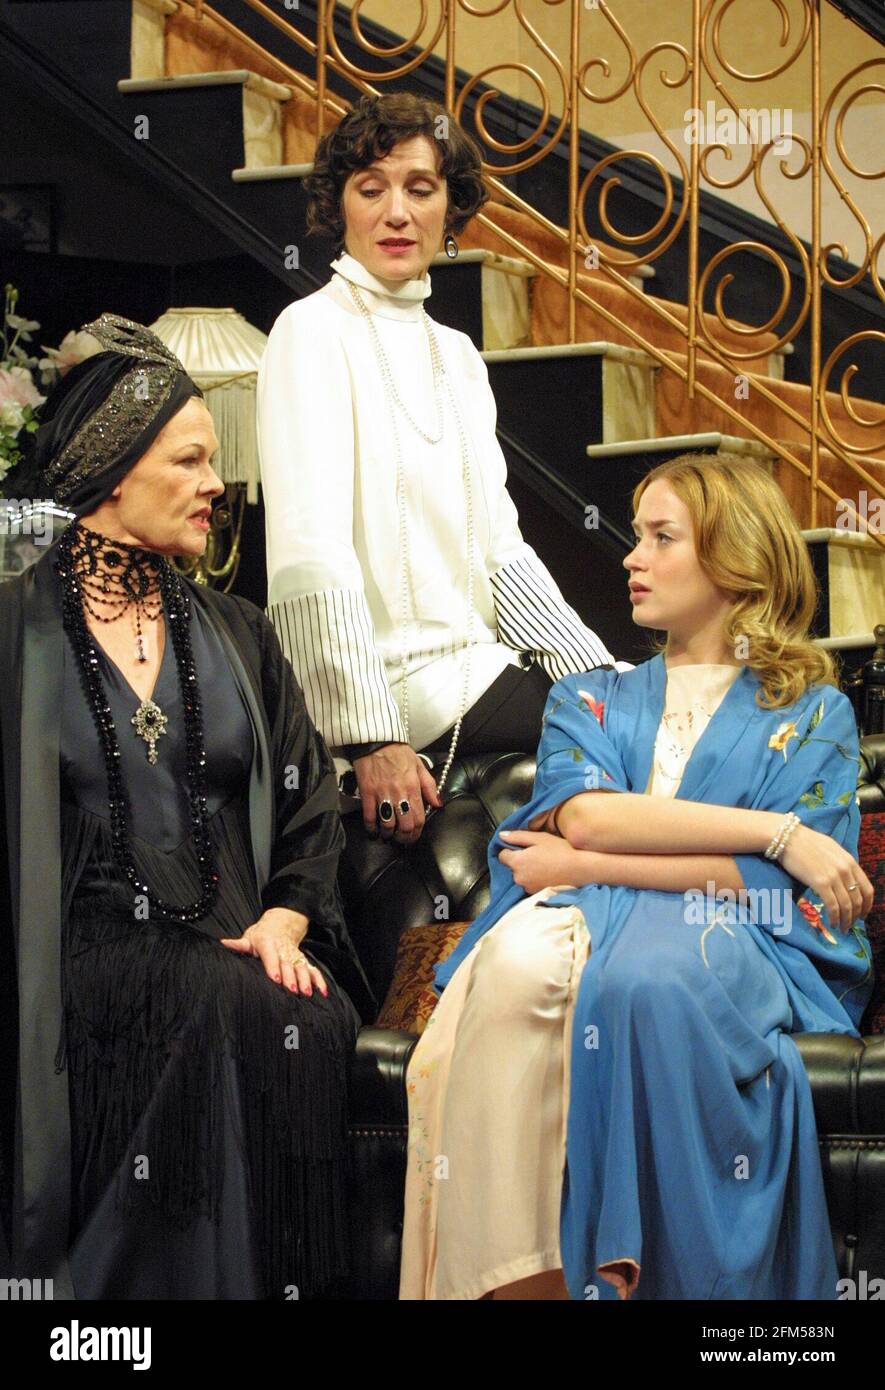 l-r: Judi Dench (Fanny Cavendish), Harriet Walter (Julie Cavendish), Emily Blunt (Gwen Cavendish) in THE ROYAL FAMILY by George S. Kaufman & Edna Ferber at the Theatre Royal Haymarket, London SW1  01/11/2001 design: Anthony Ward  lighting: Jon Buswell  director: Peter Hall Stock Photo